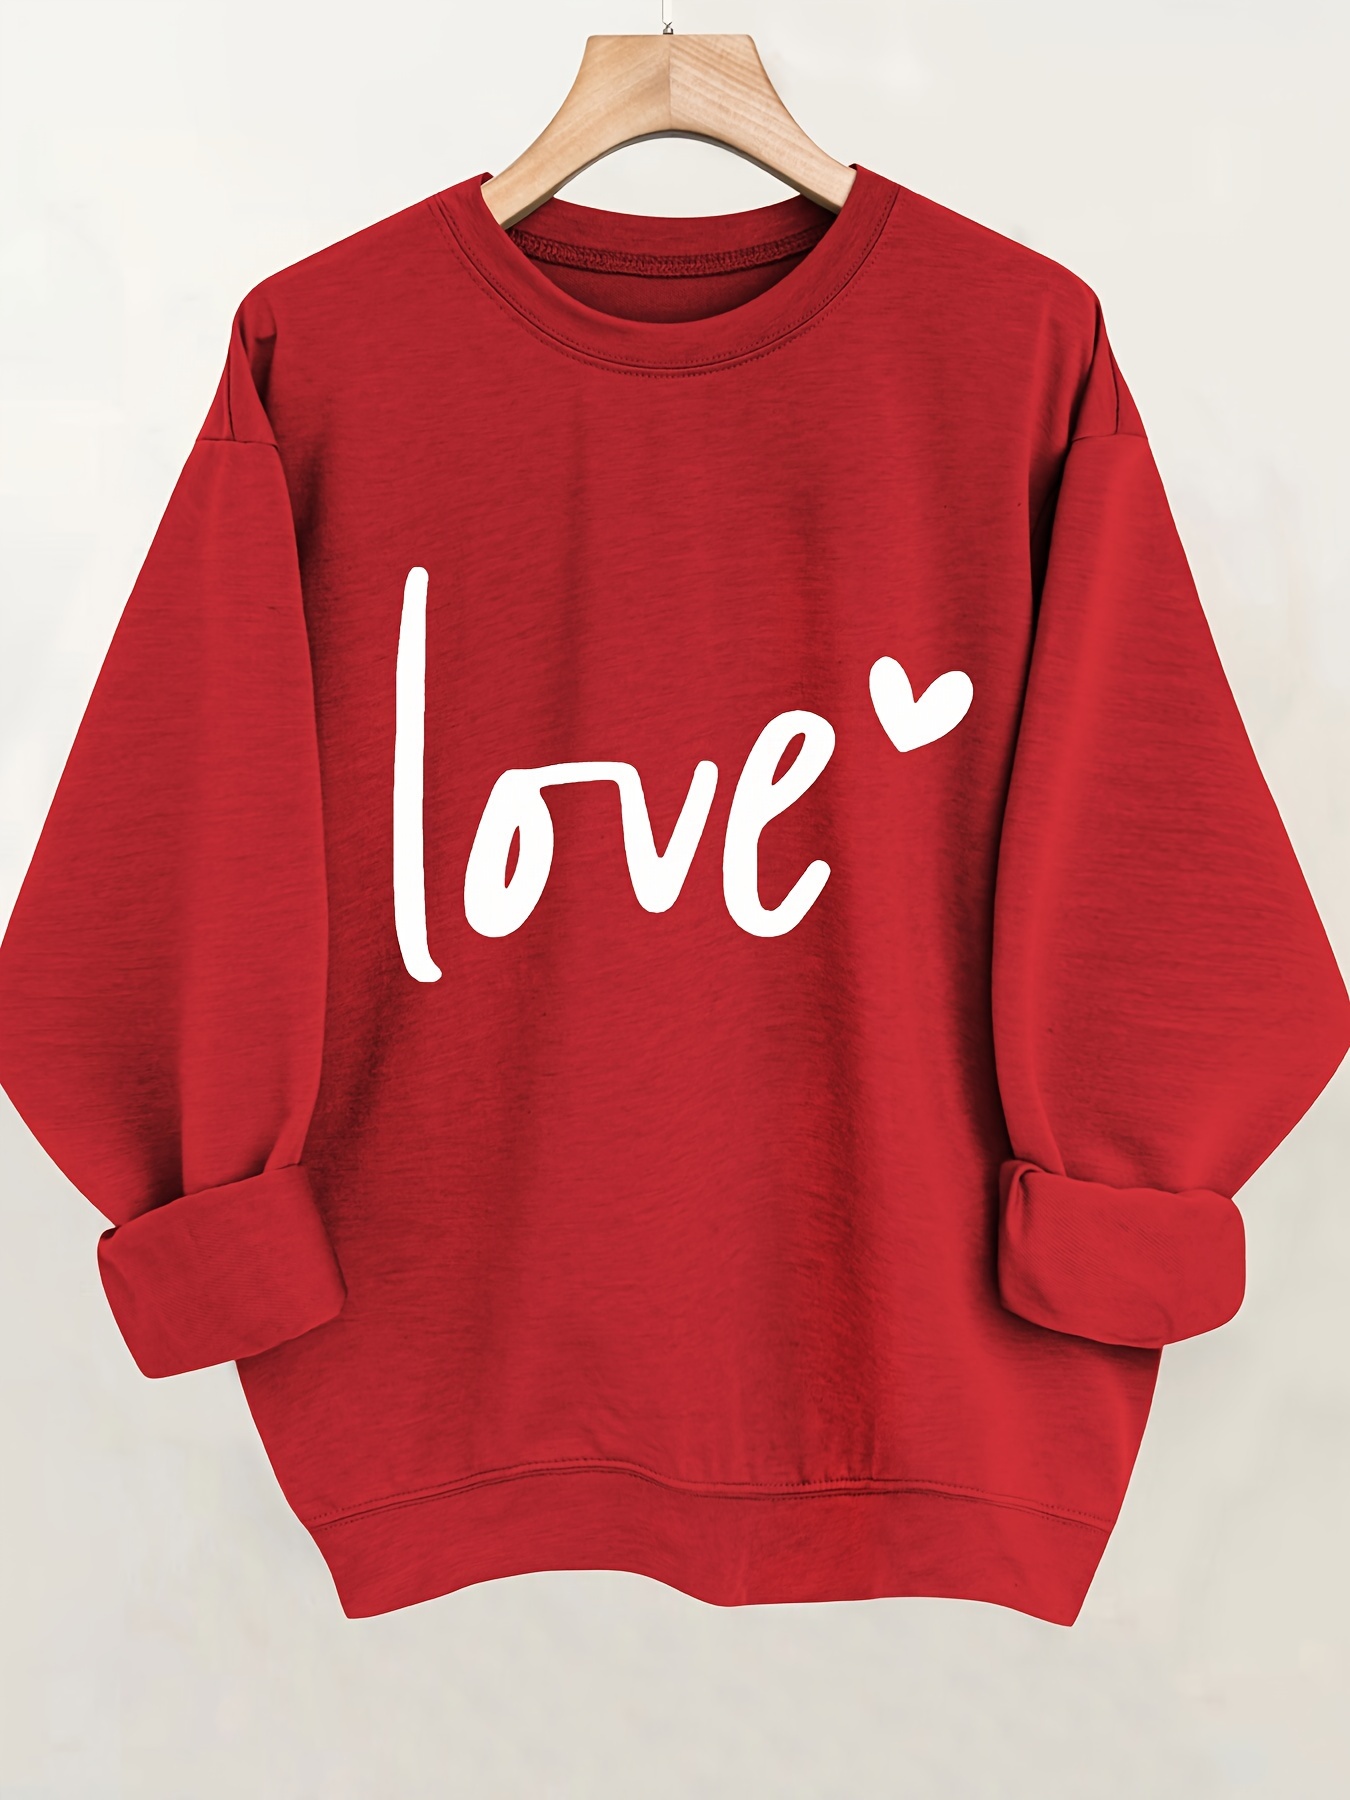 Hoodies for Women Long Sleeve Hooded Sweatshirt Large Size Valentine's Day  Casual Crew Neck Drawstring Pullover Tops Sweater for Women Womens Tops